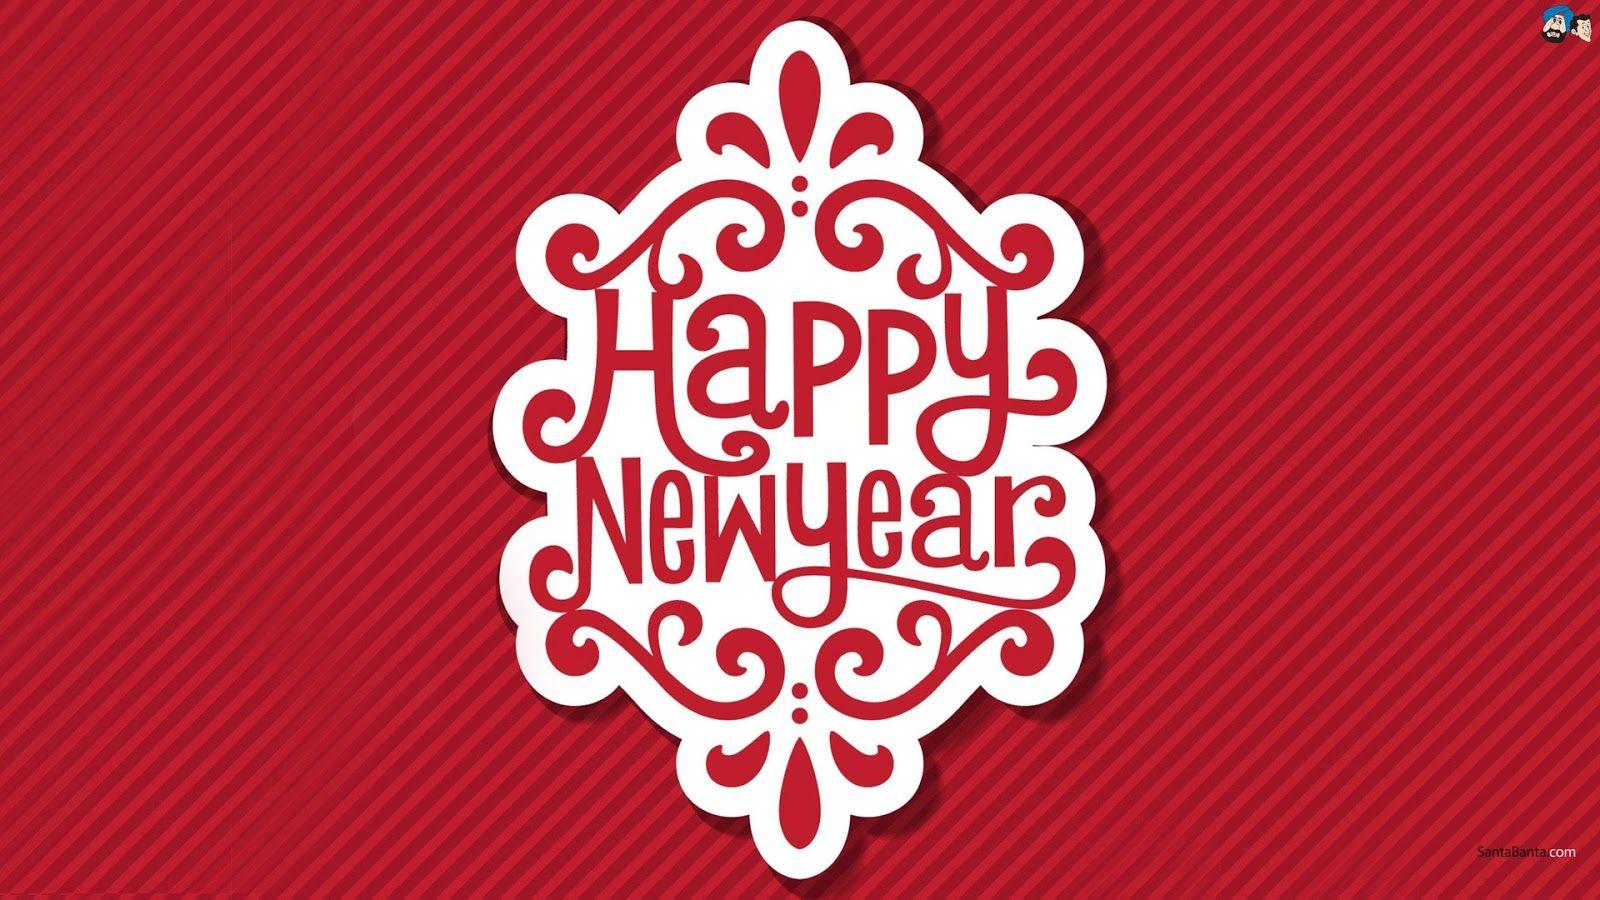 Happy New Year Logo - Happy New Year & Vogue - Sewing and DIY - Pretty Girls Sew - Learn ...